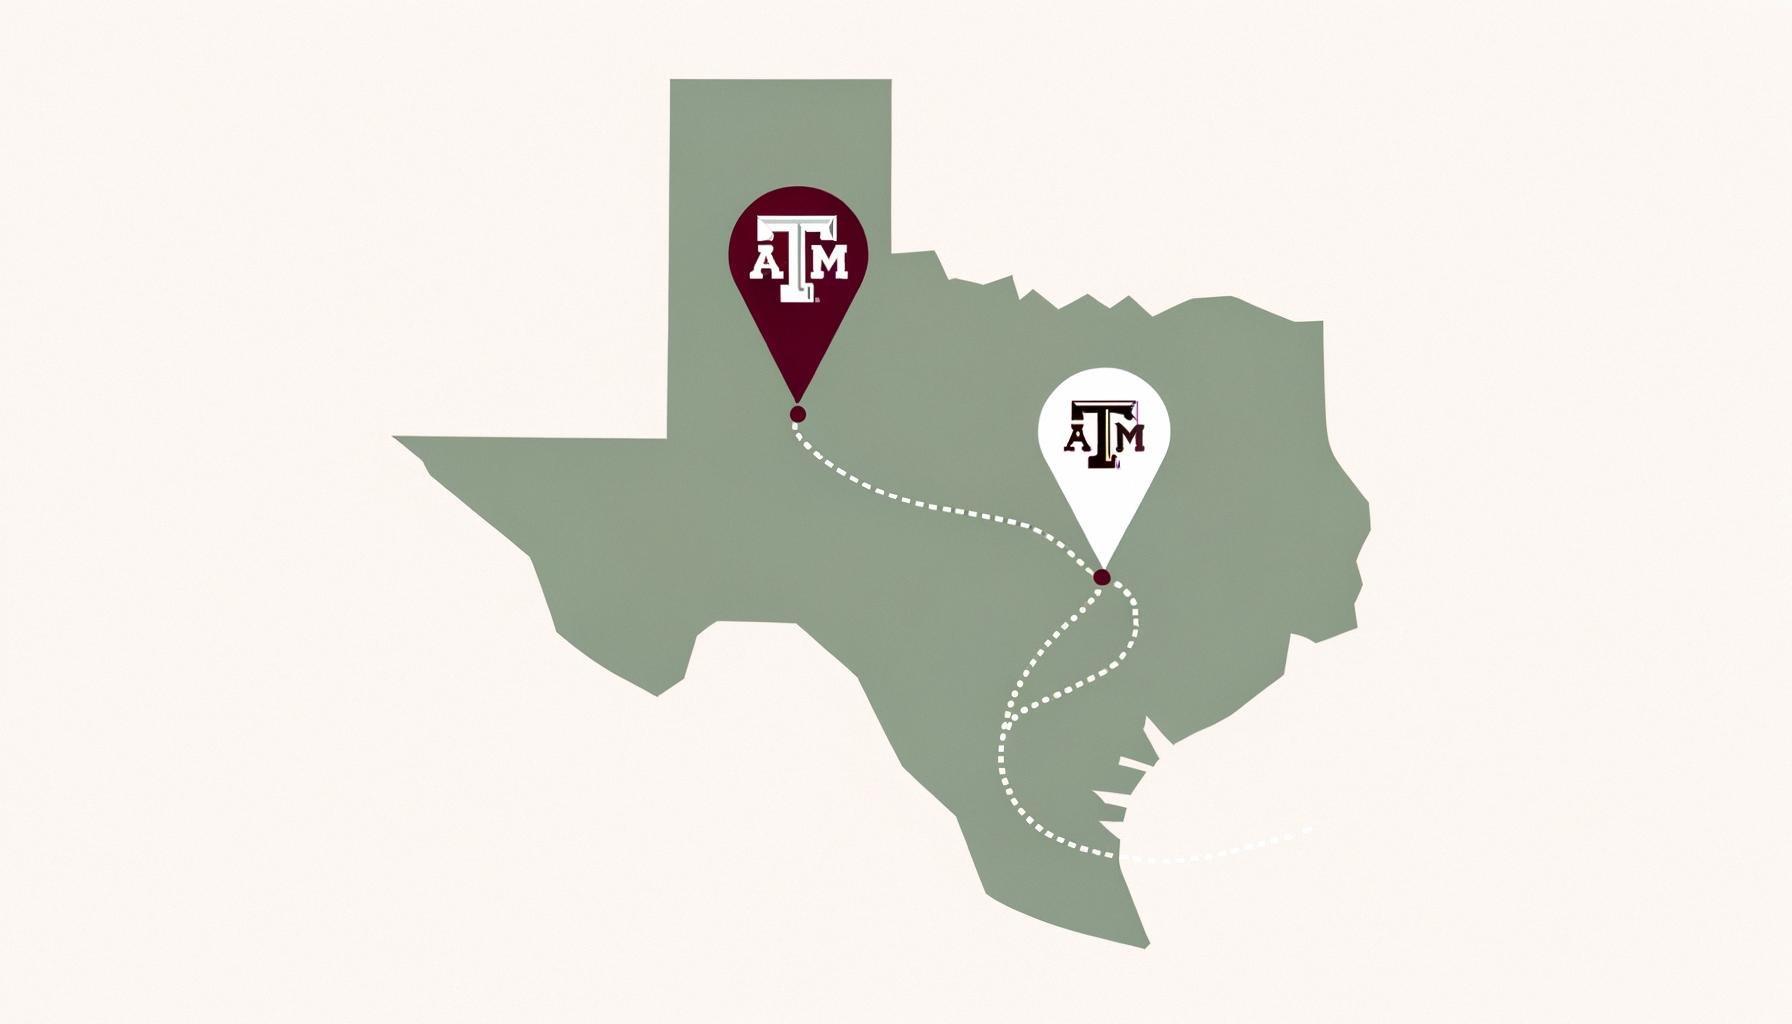 Jim Schlossnagle's move reshapes Texas-Texas A&M rivalry and college baseball landscape.